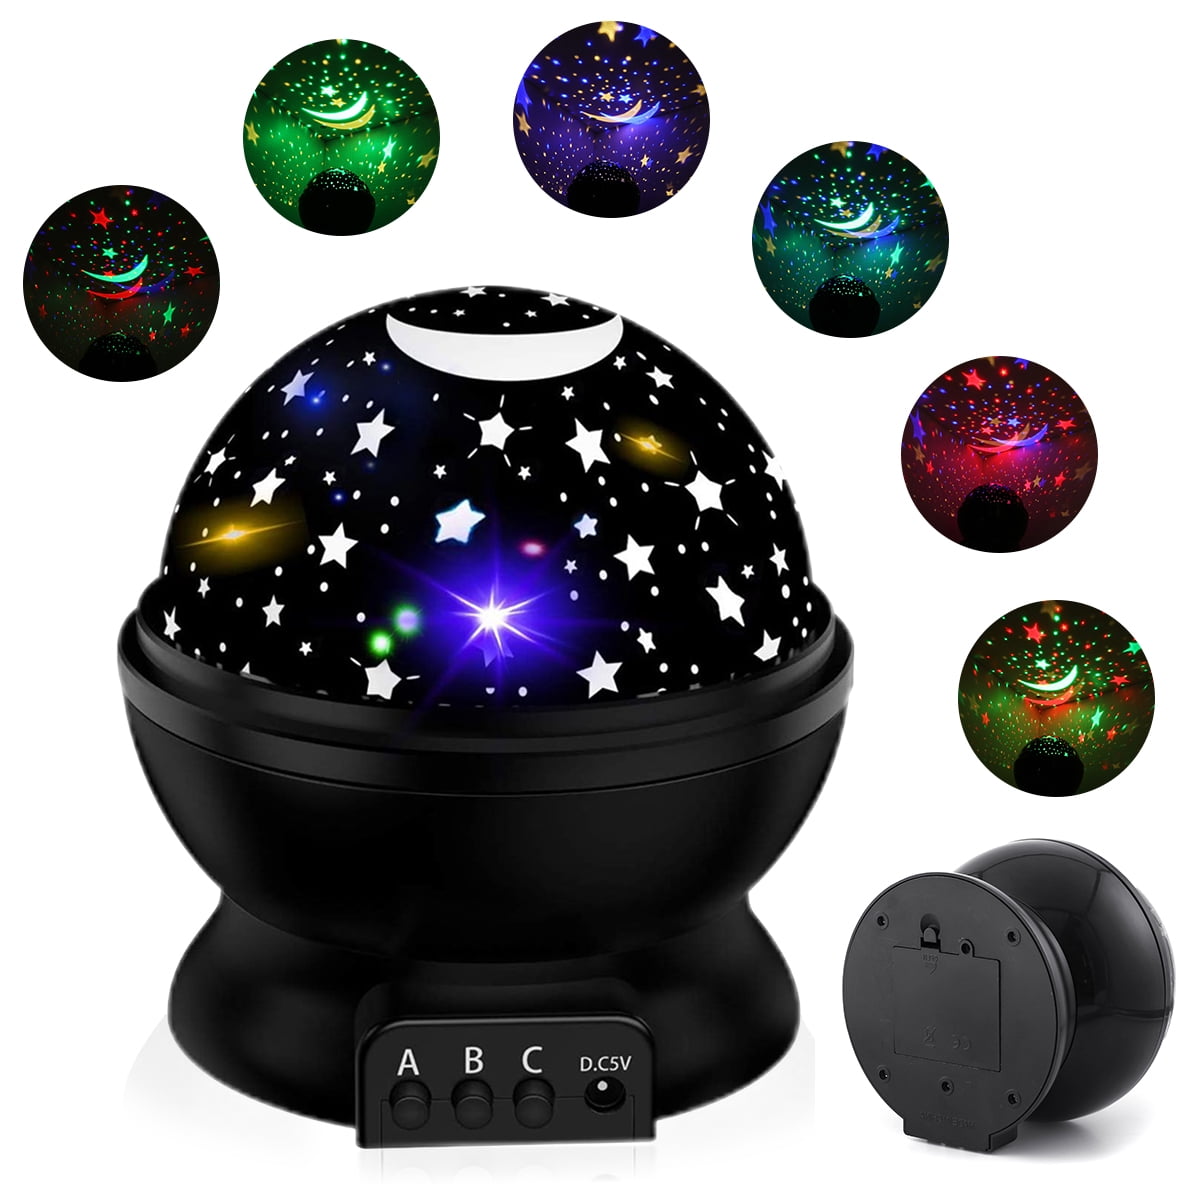 Details about   LED Galaxy Sky Laser Projector Night Light Ocean Wave Star Moon Voice Control 